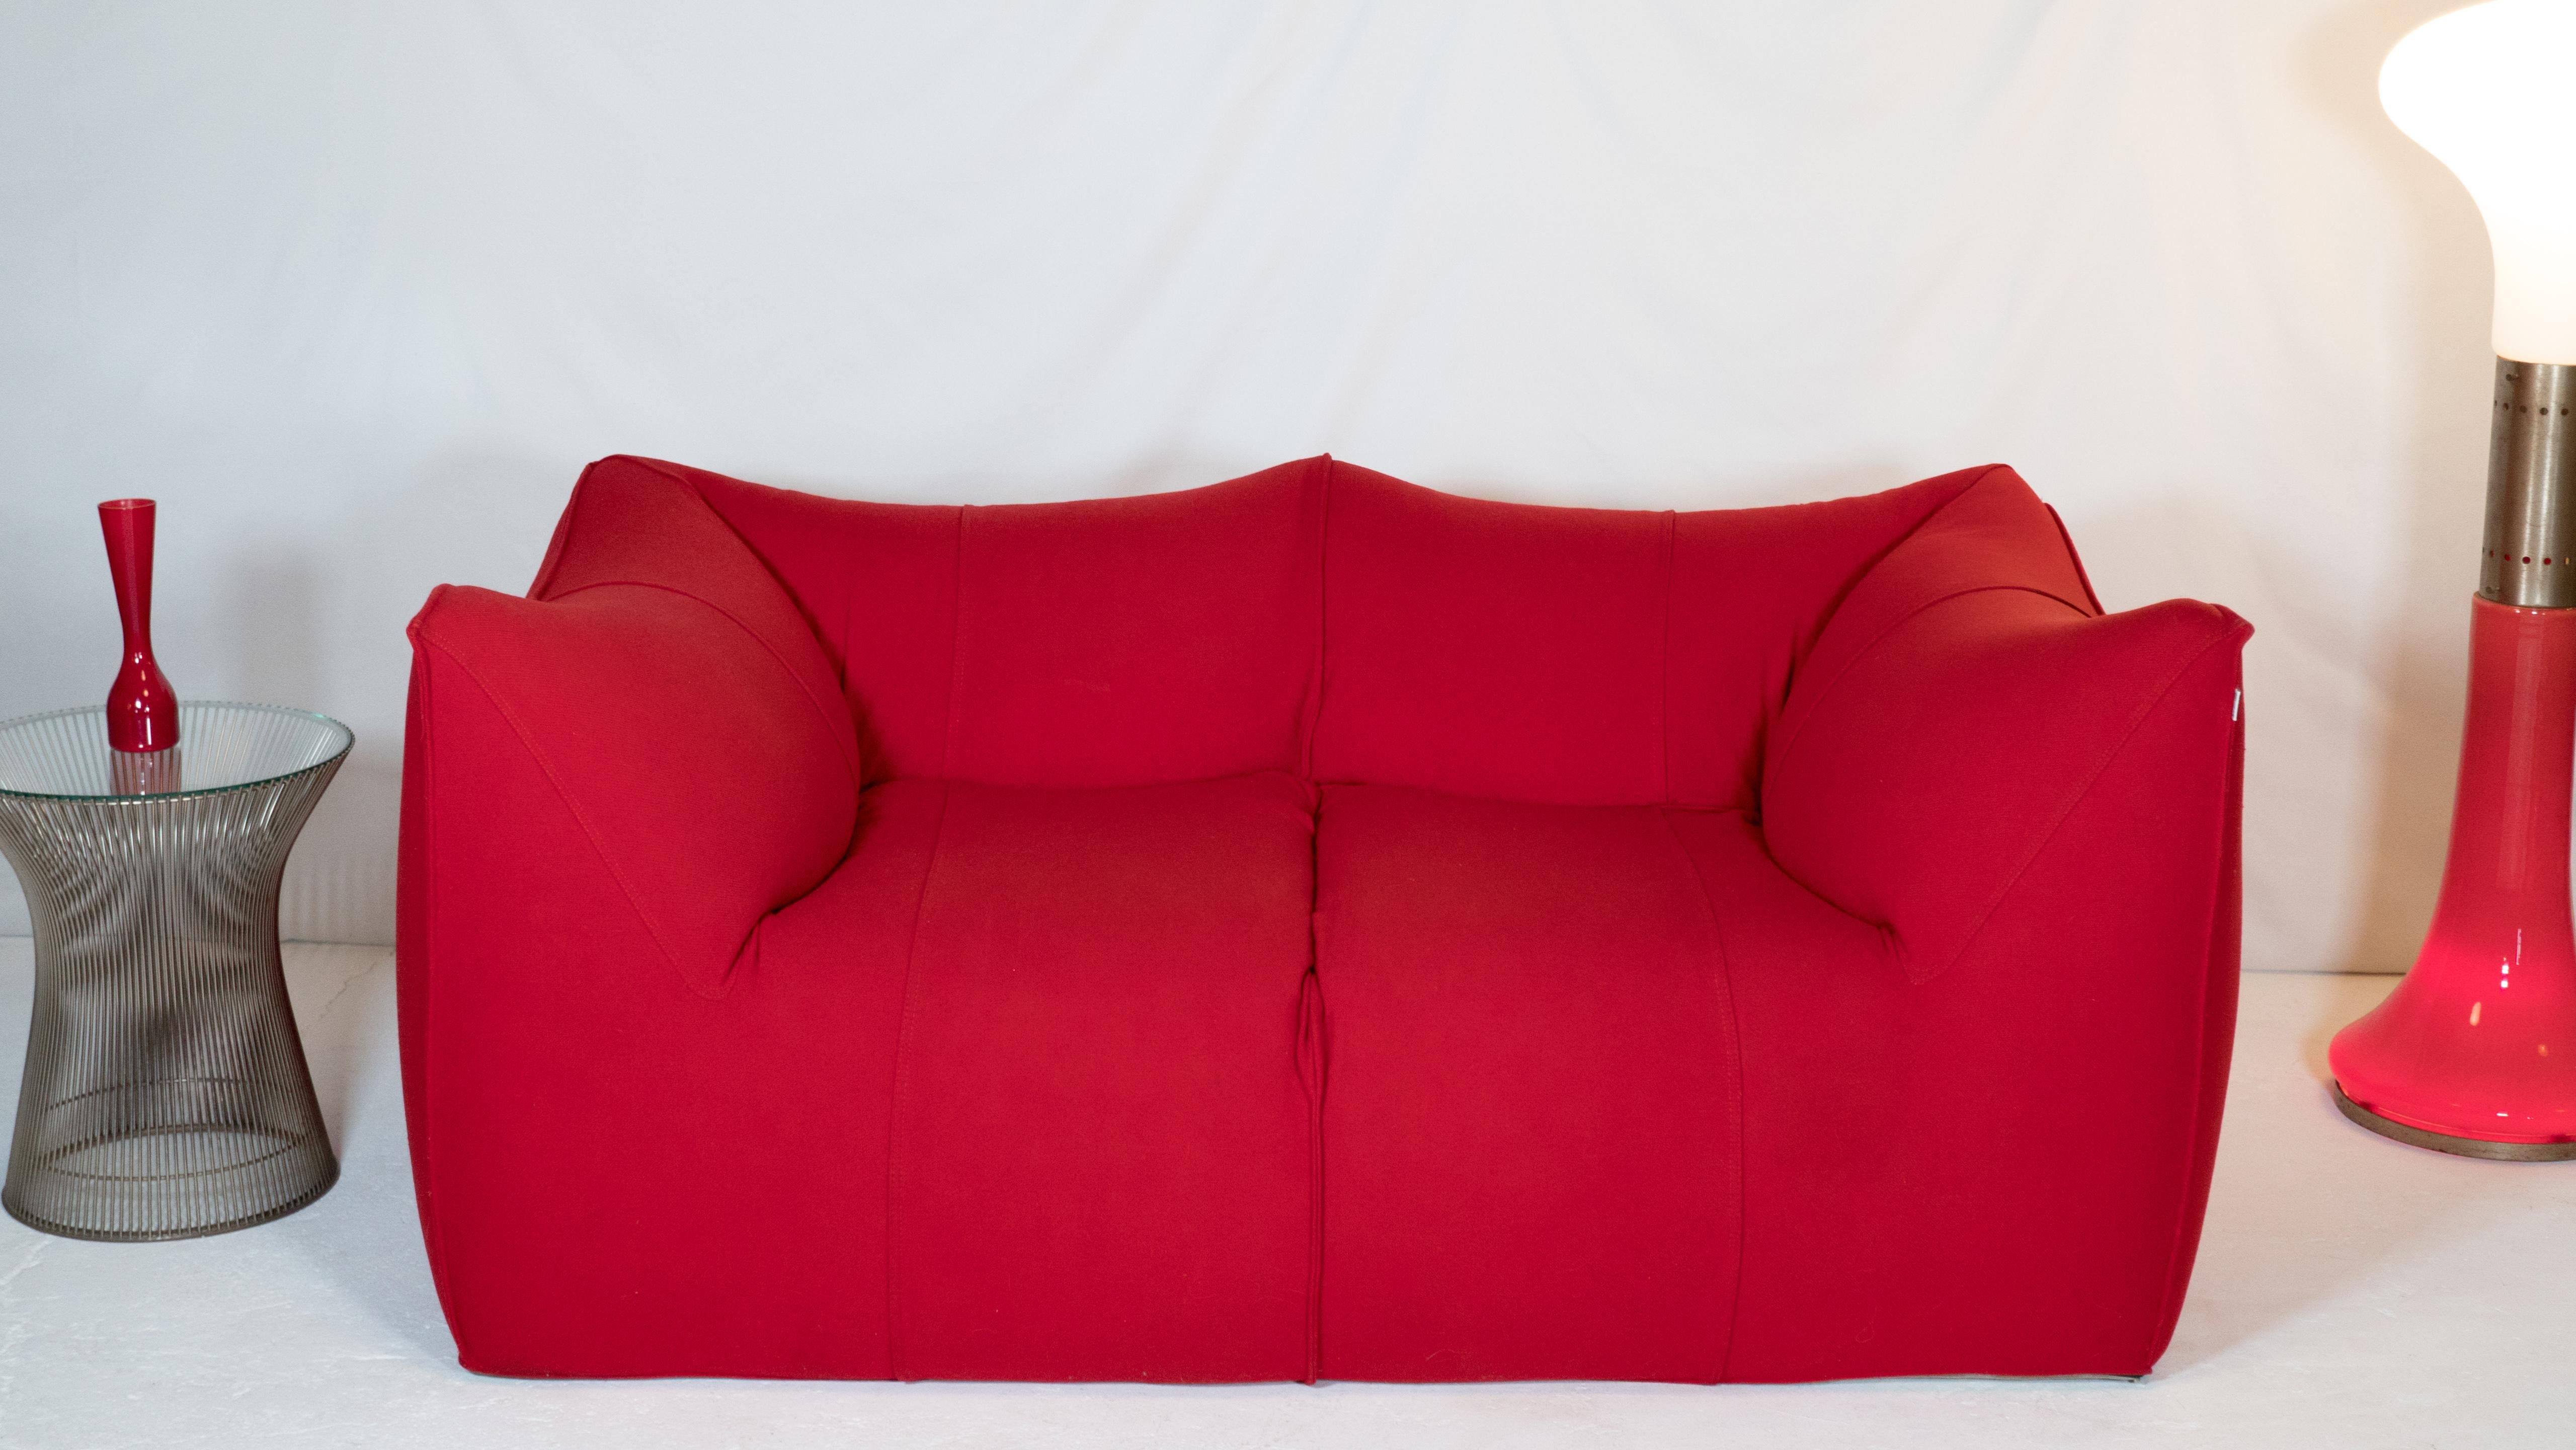 Le Bambole' sofa designed by Mario Bellini for B&B Italia, circa 1990s. Wrapped in thick original red wool upholstery. Le Bambole envisaged a “fabric containing a soft body” with naturalness of shape and form. Playful informality with functional